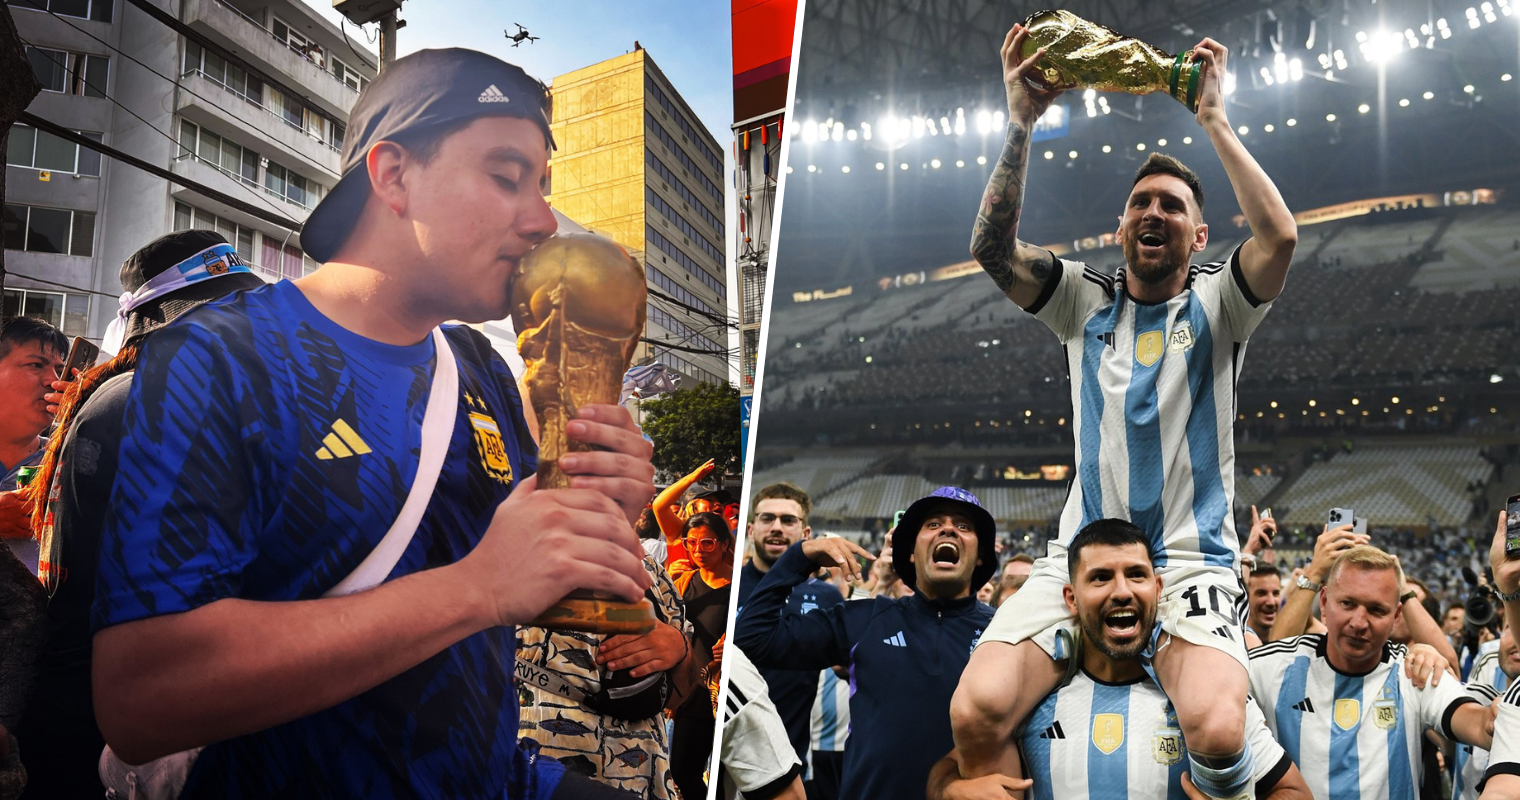 Man predicts Messi World Cup win 2022